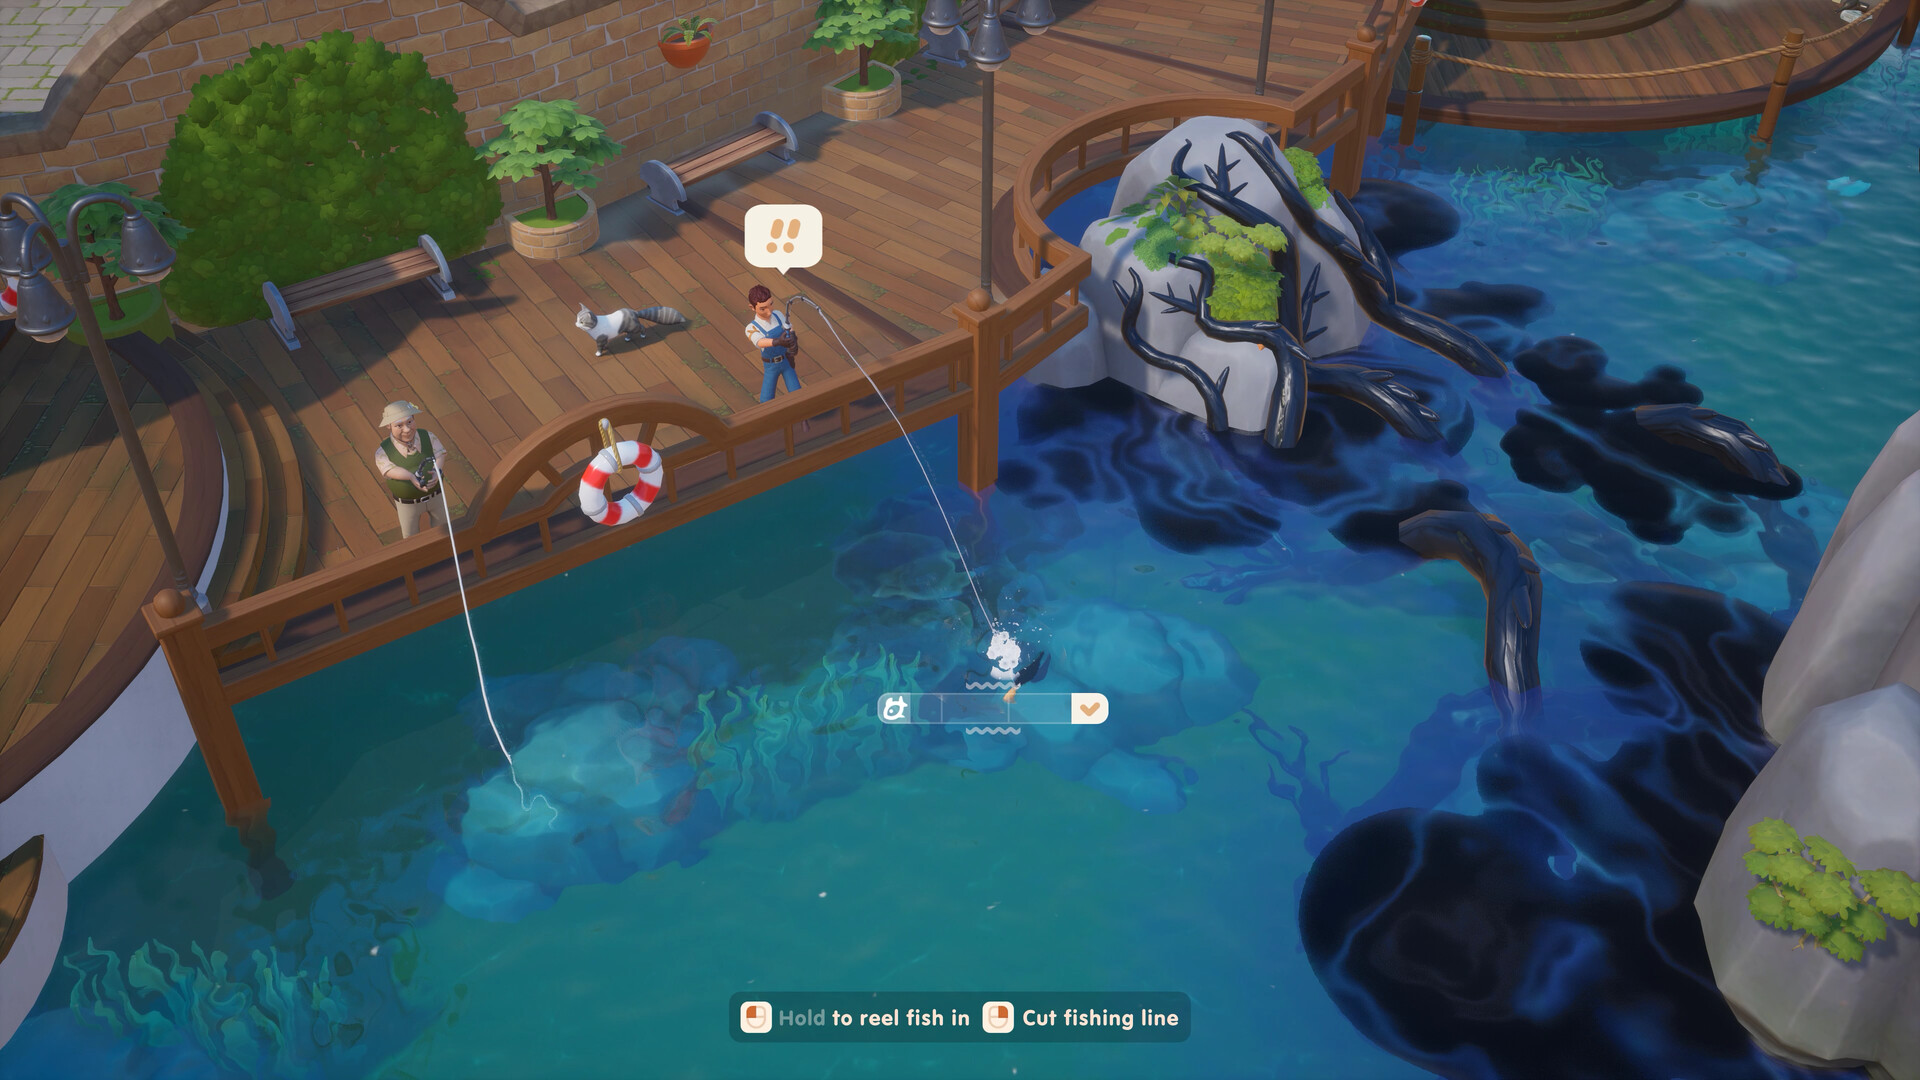 Coral Island: How to Get the Fishing Pole and Catch Fish